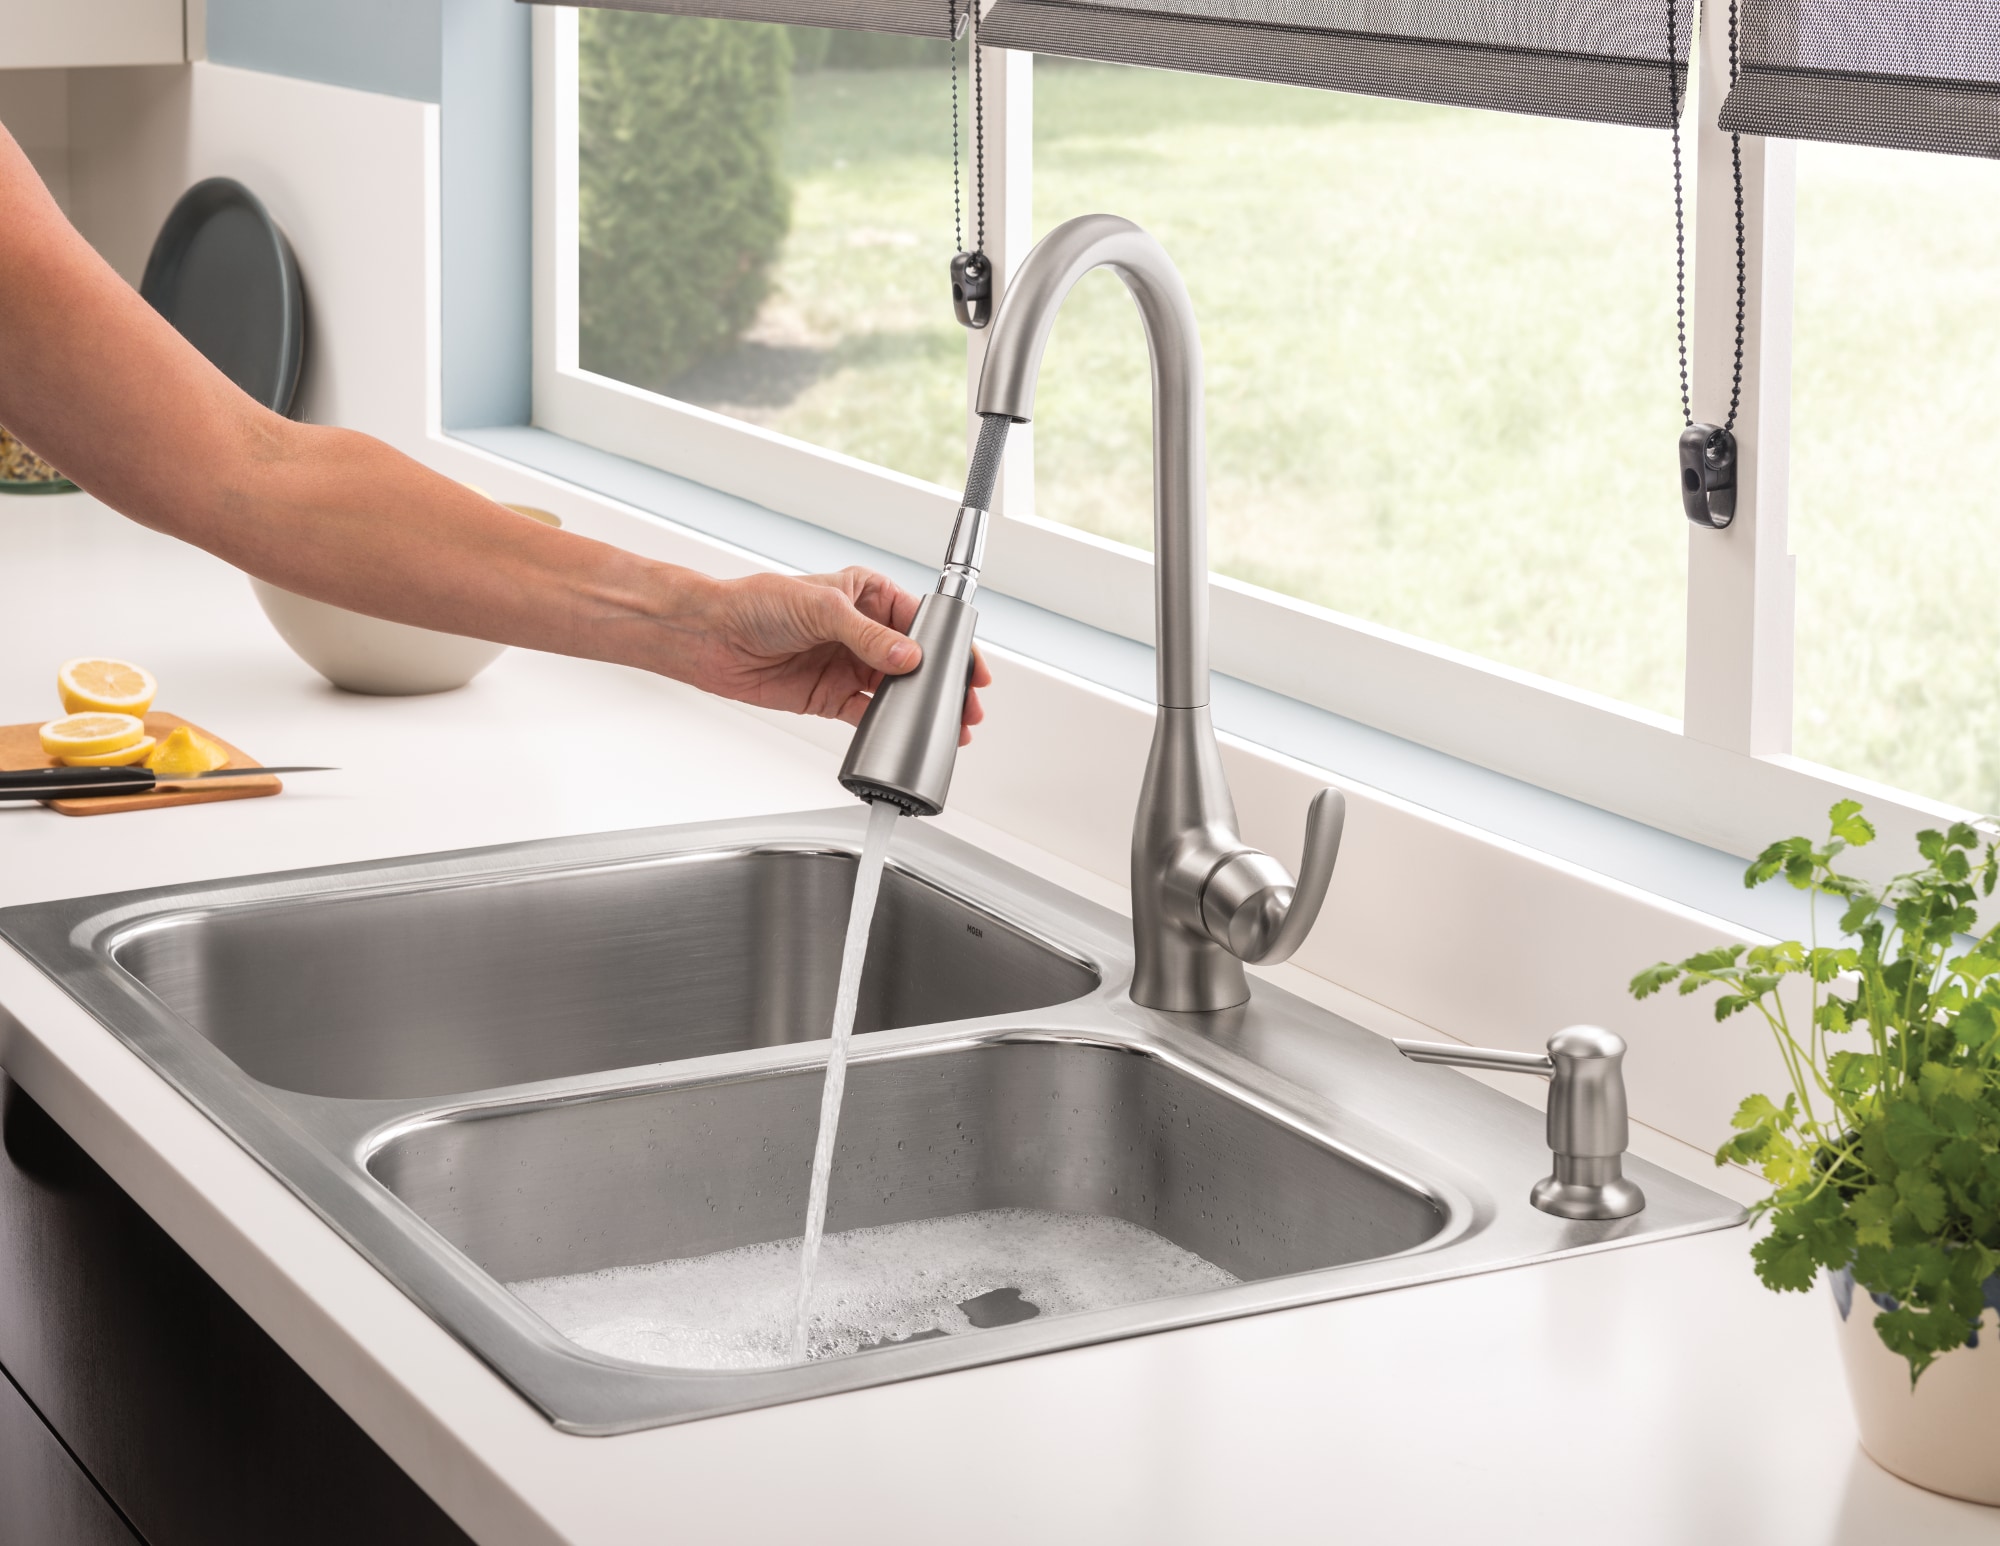 Moen Lainie Dual-mount 33-in x 22-in Stainless Steel Double Offset Bowl  2-Hole Kitchen Sink All-in-one Kit in the Kitchen Sinks department at